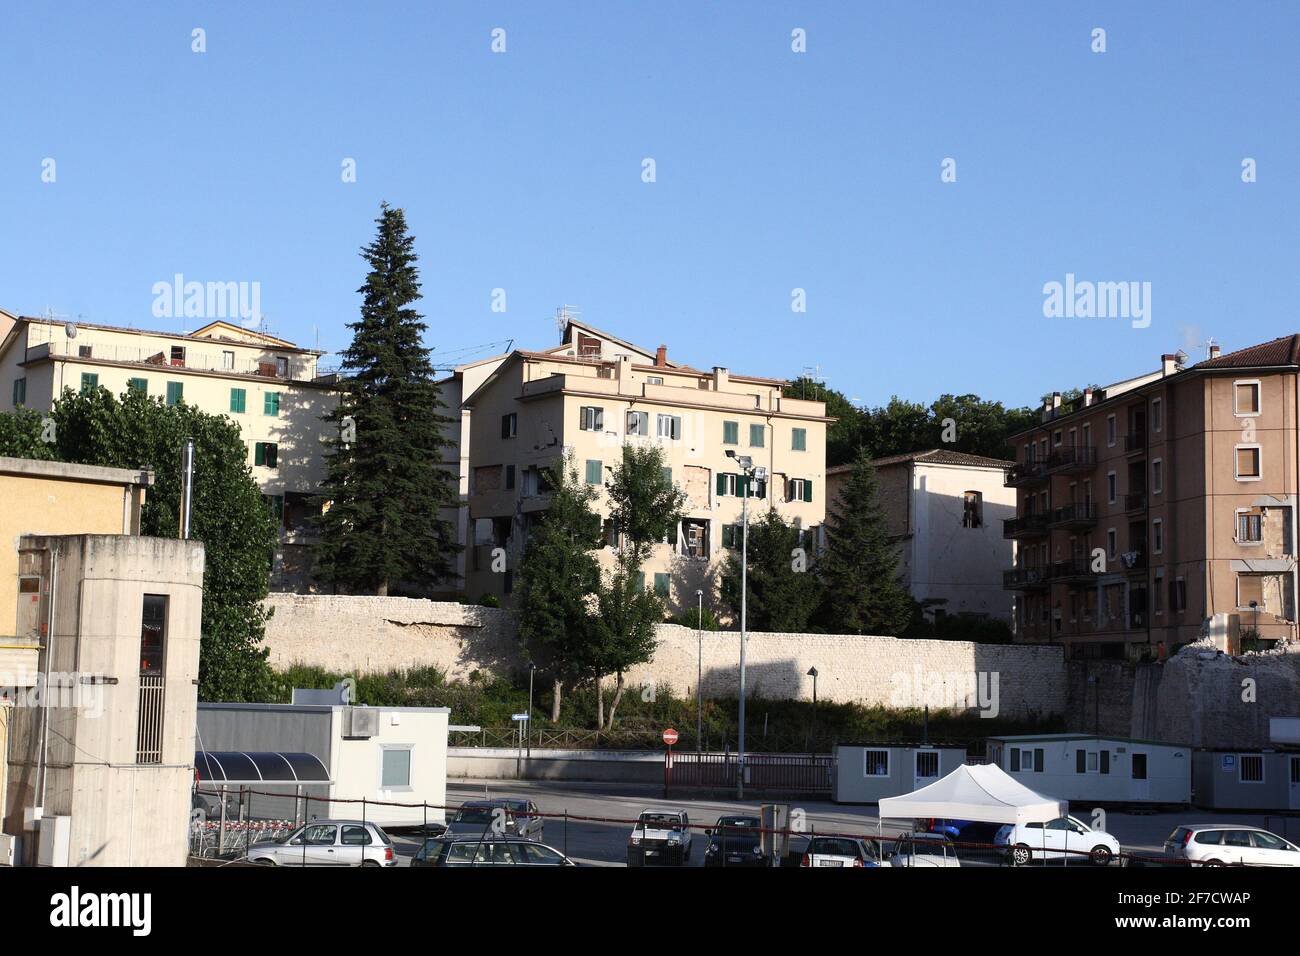 L'Aquila, Italy - July 9, 2009: The city destroyed by the earthquake Stock Photo